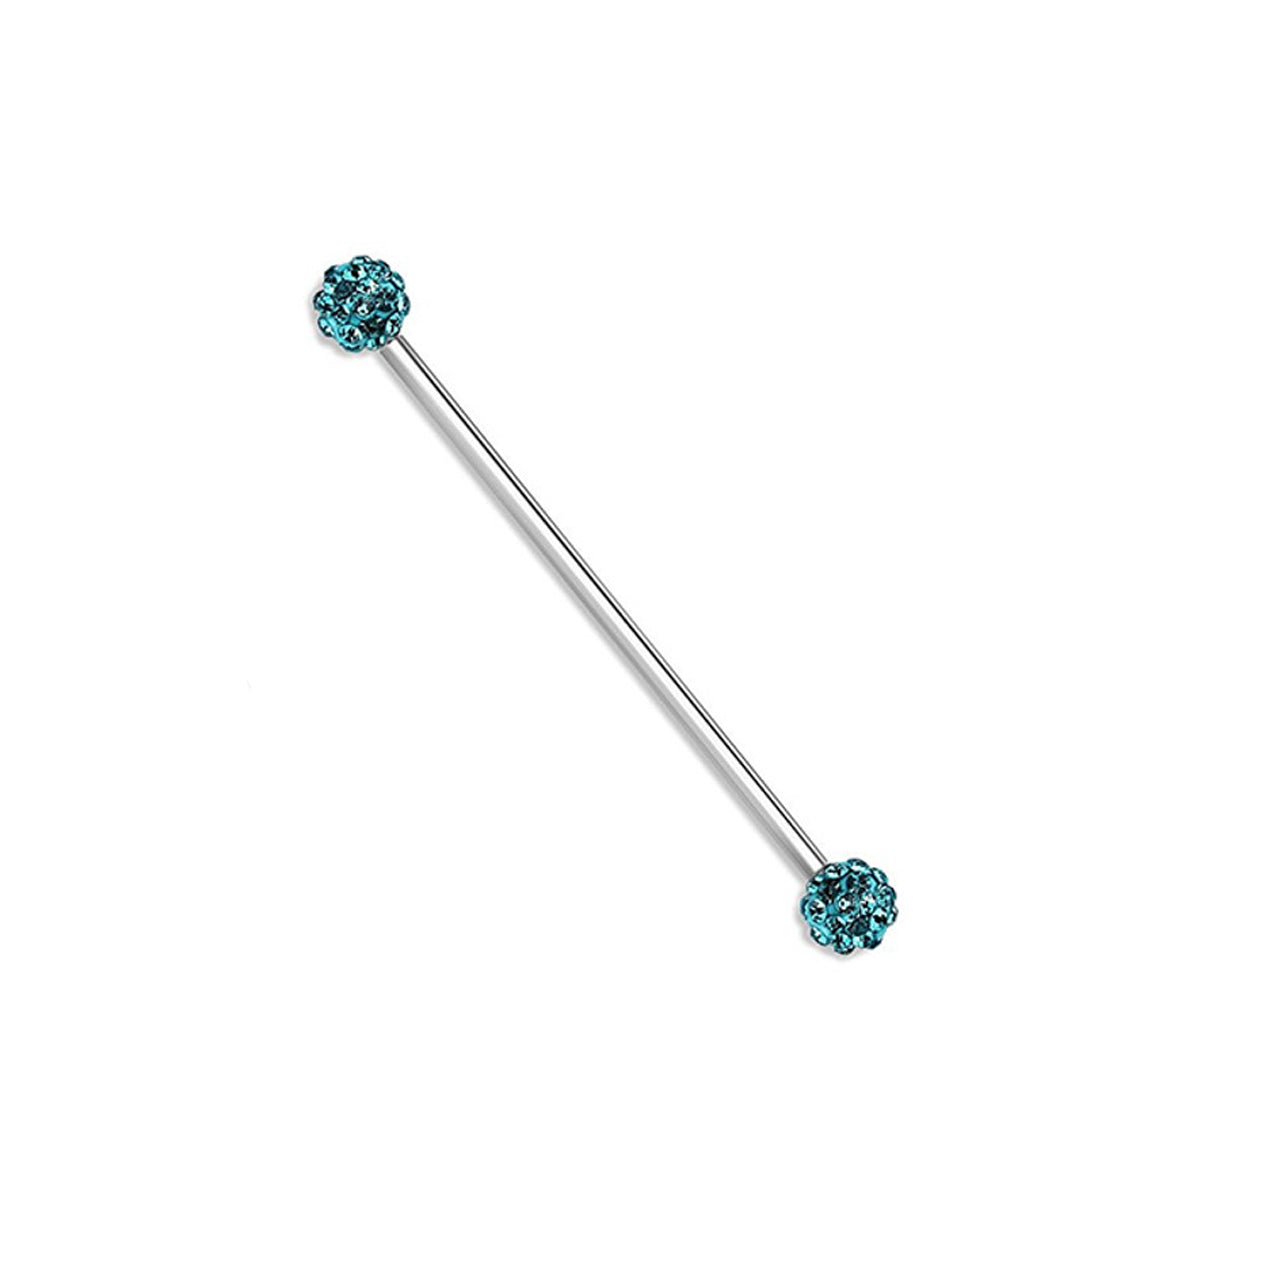 Surgical Steel Industrial Barbell 14 Gauge with Ferido Ball